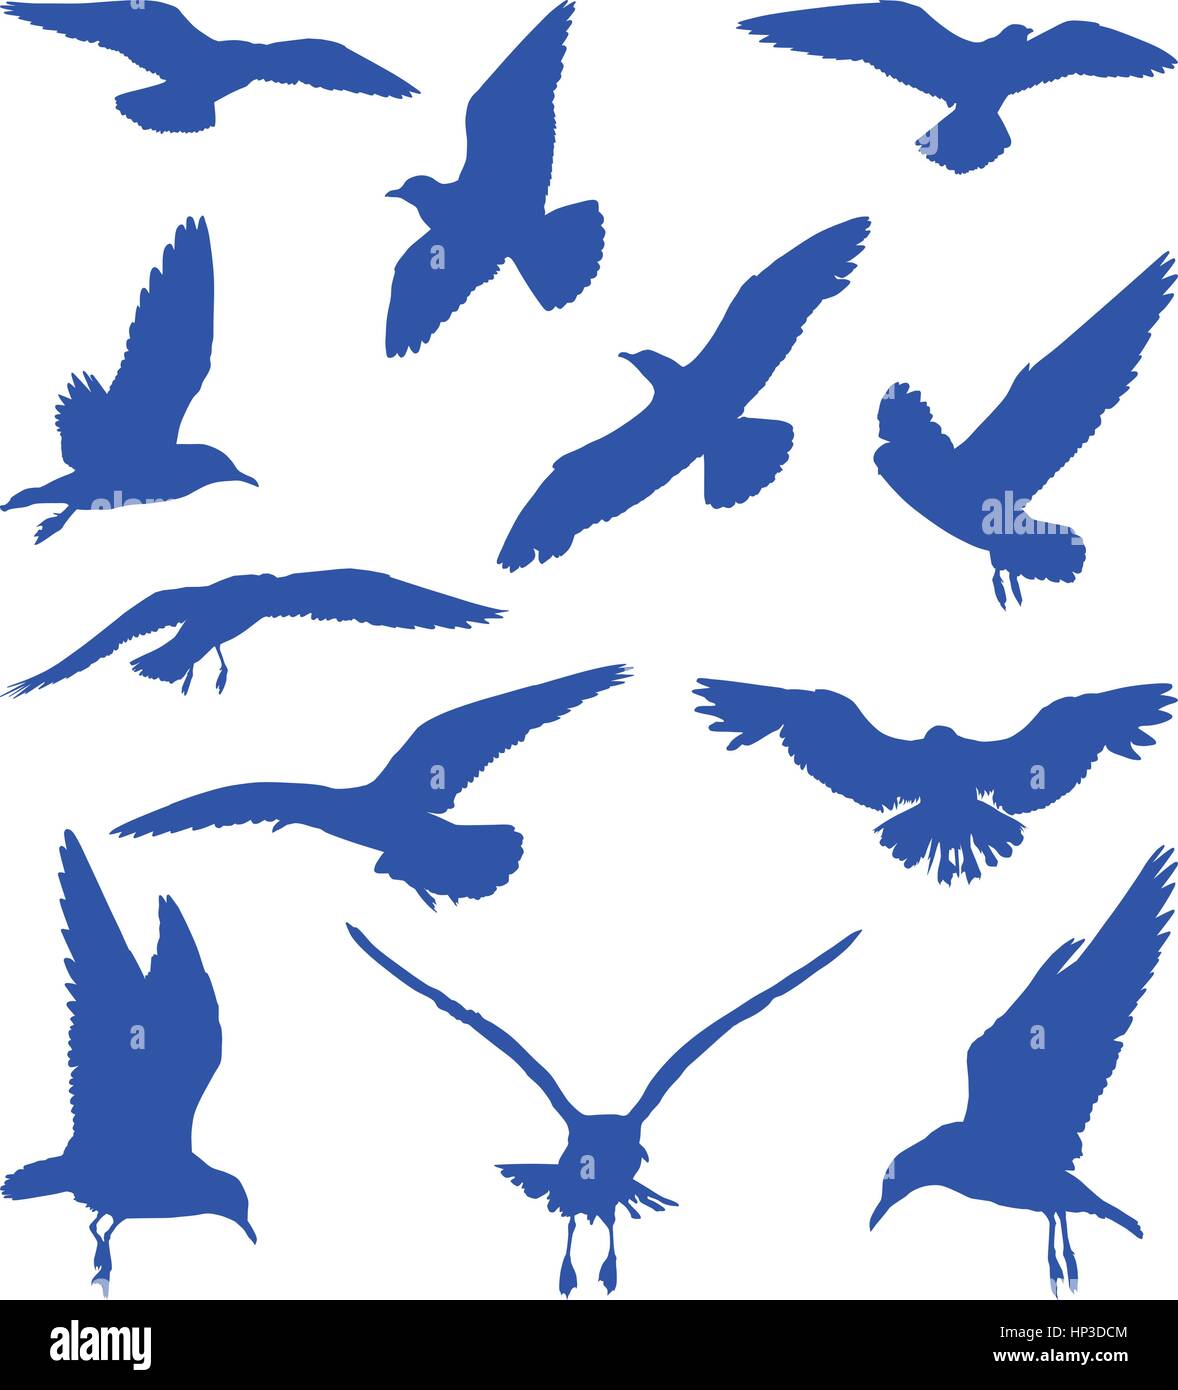 Birds, seagulls in blue silhouettes Stock Vector